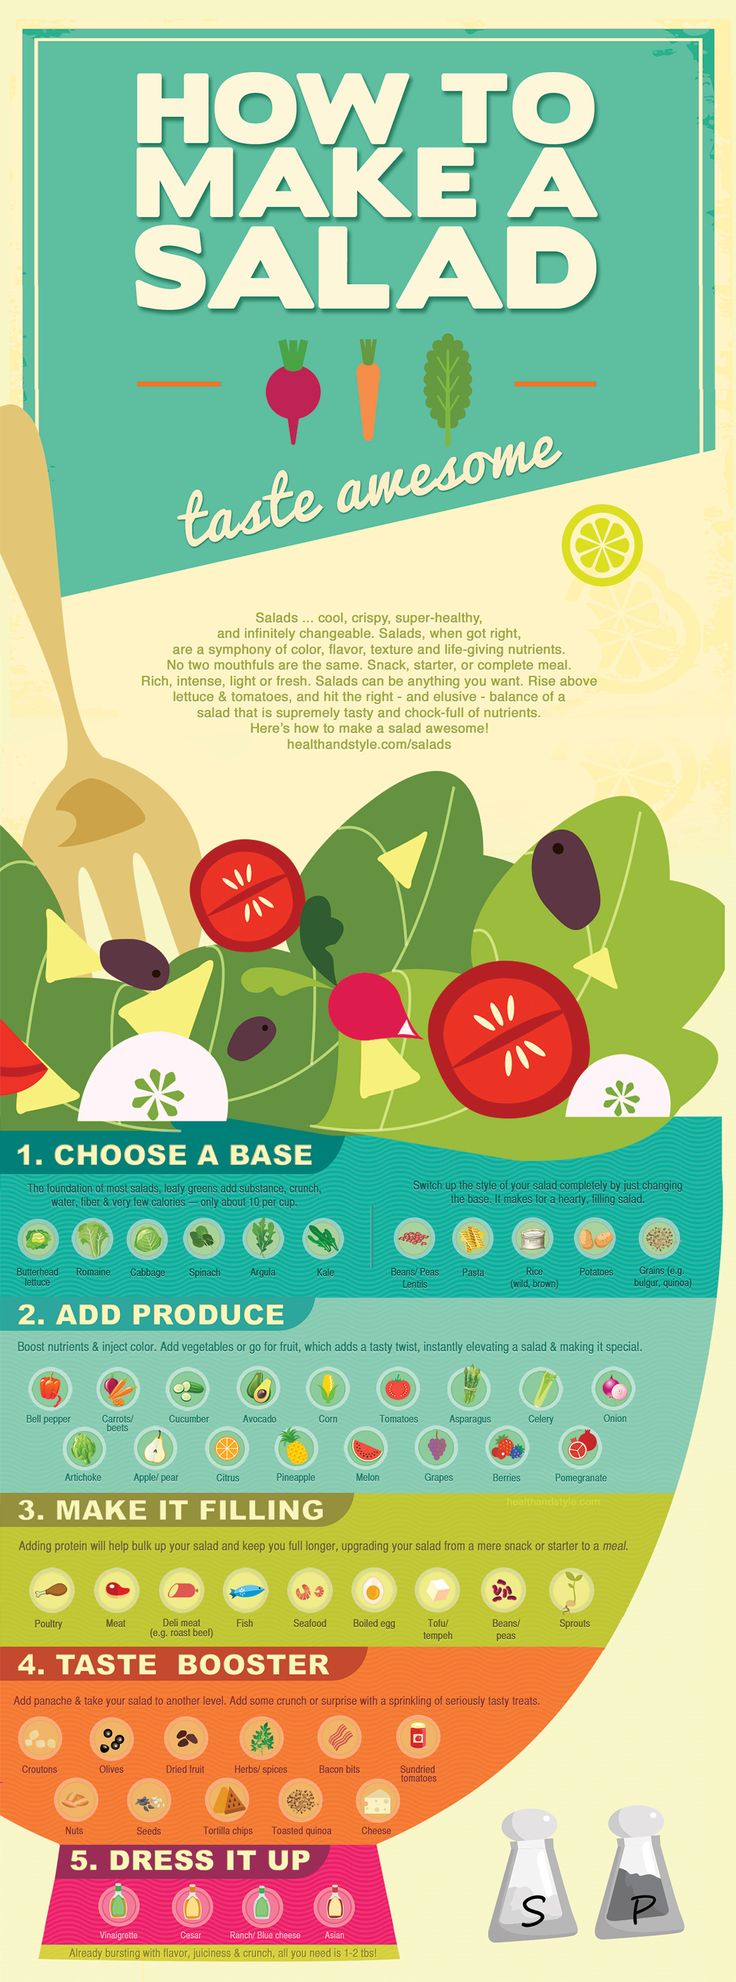 How To Make A Salad (Infographic)